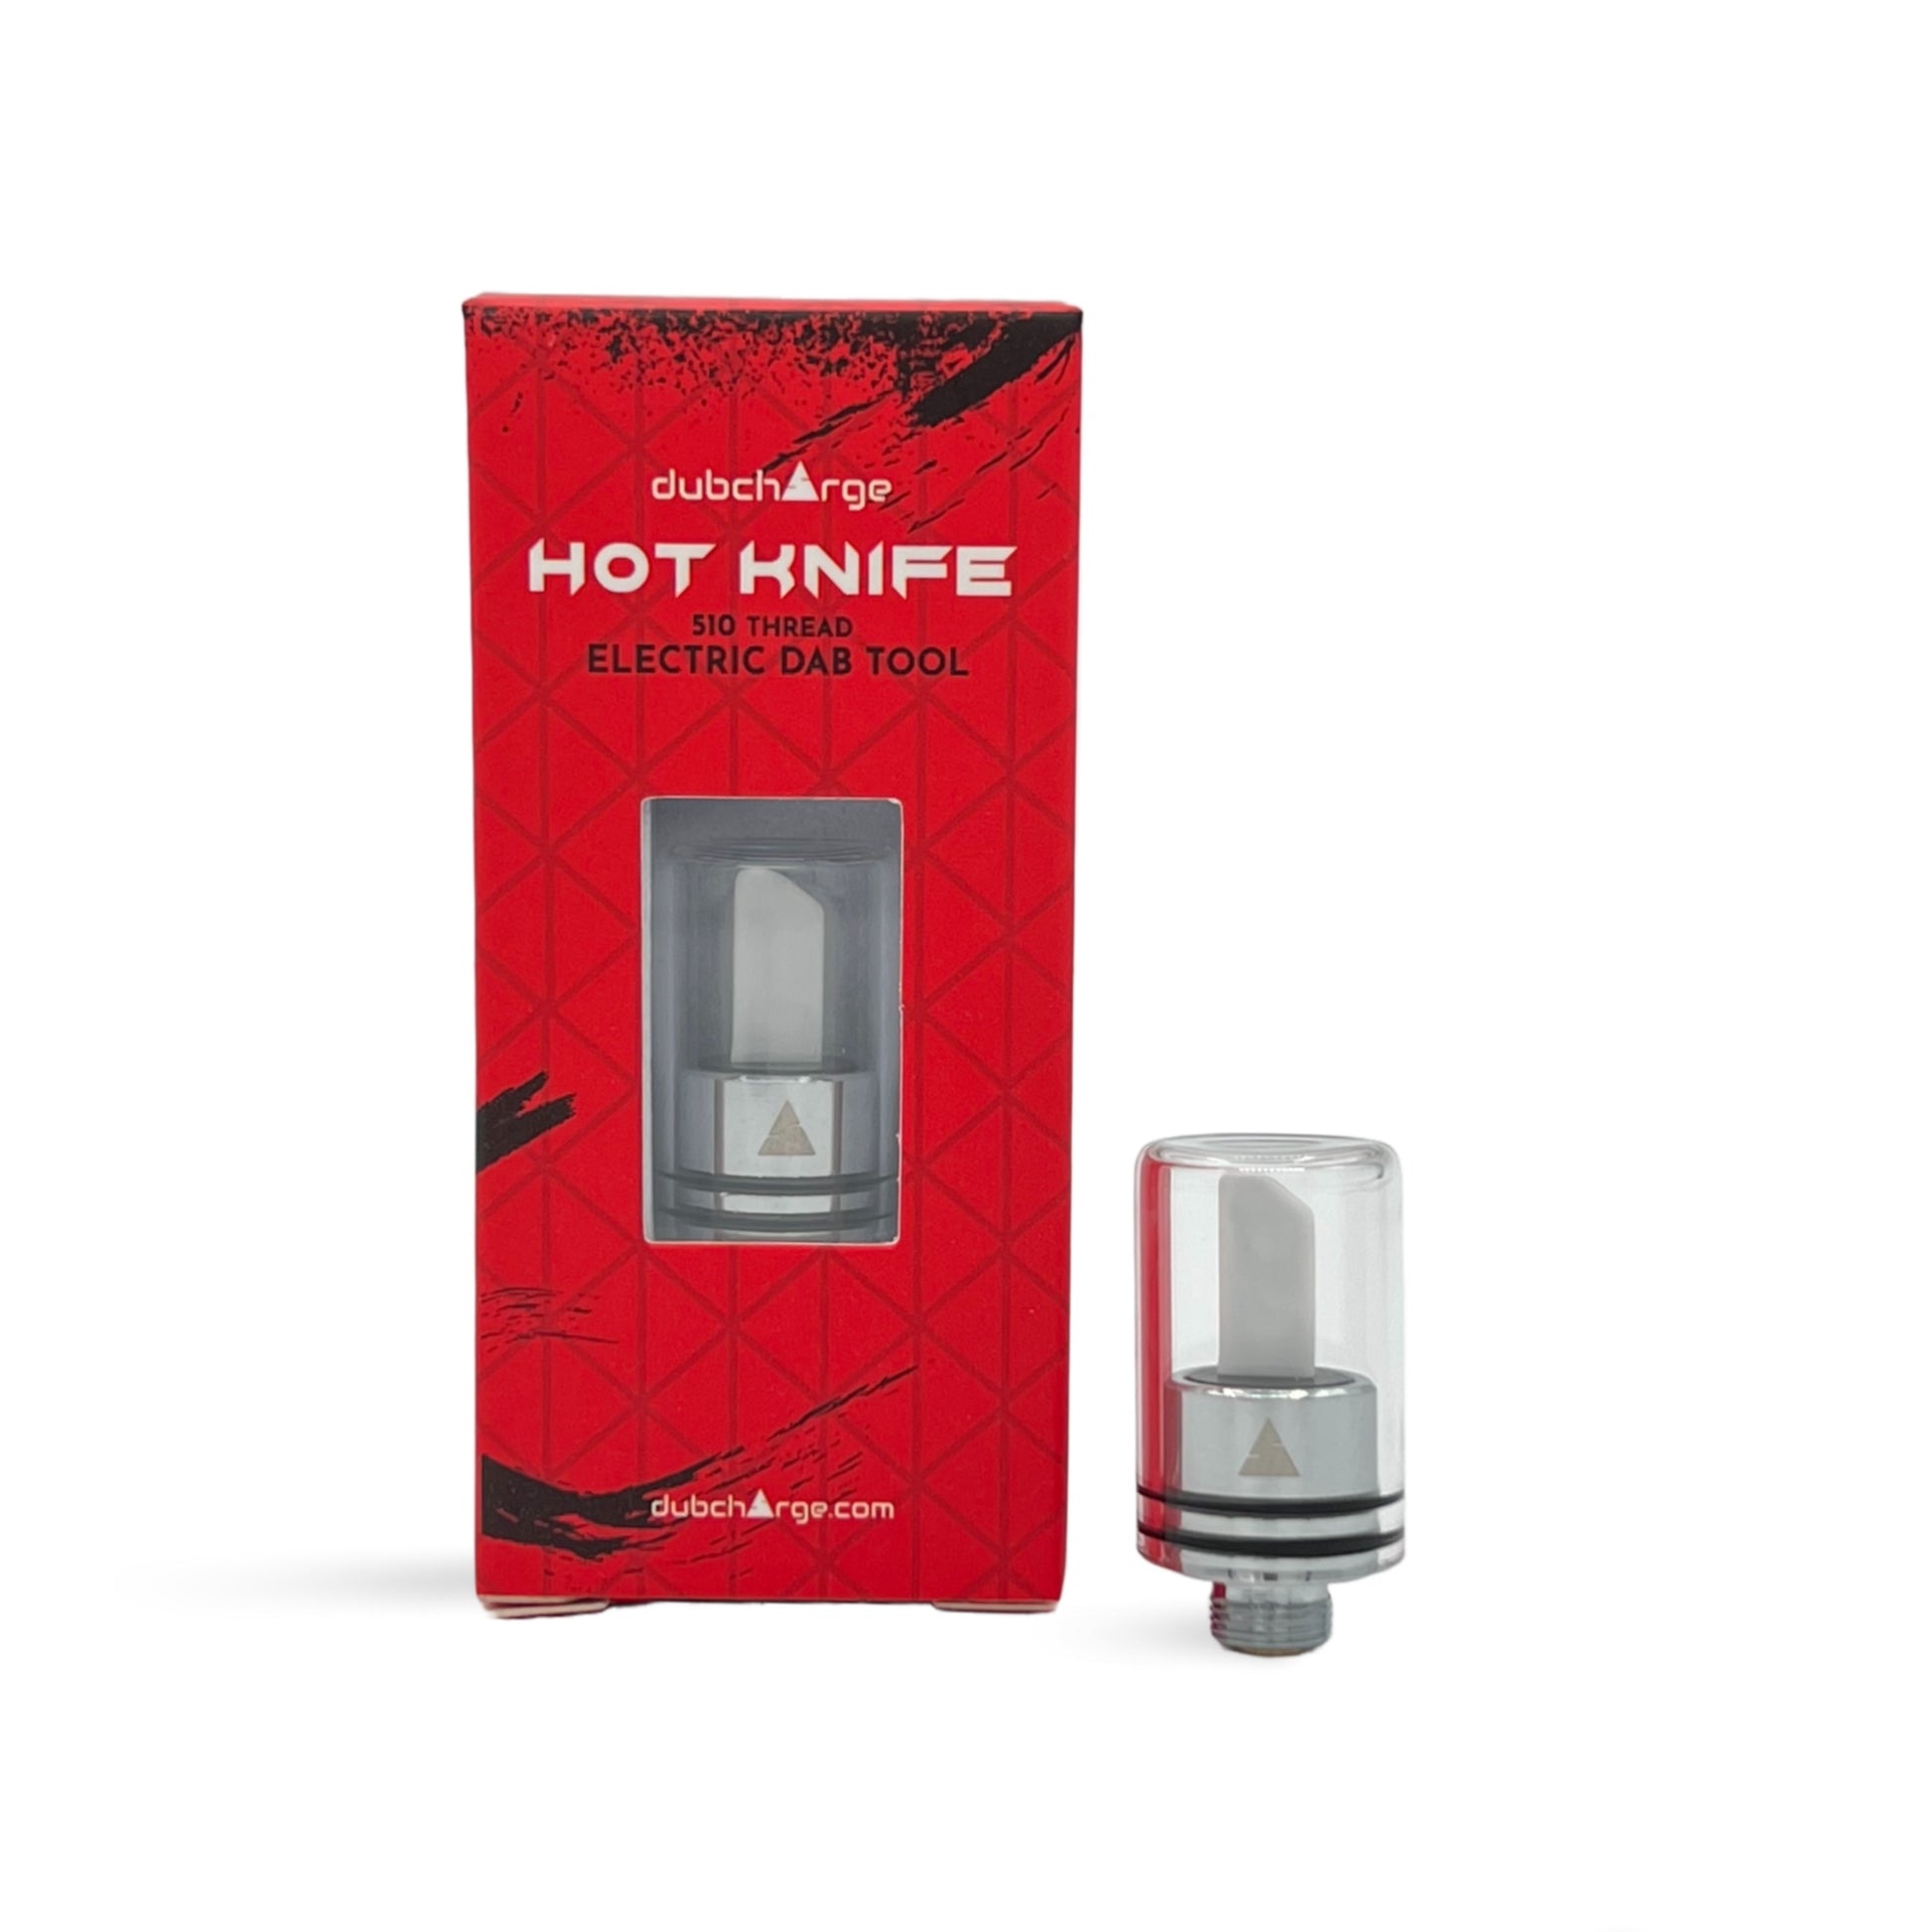 Buy Hot Knife Electric Dab Tools with 2-3 Day Shipping